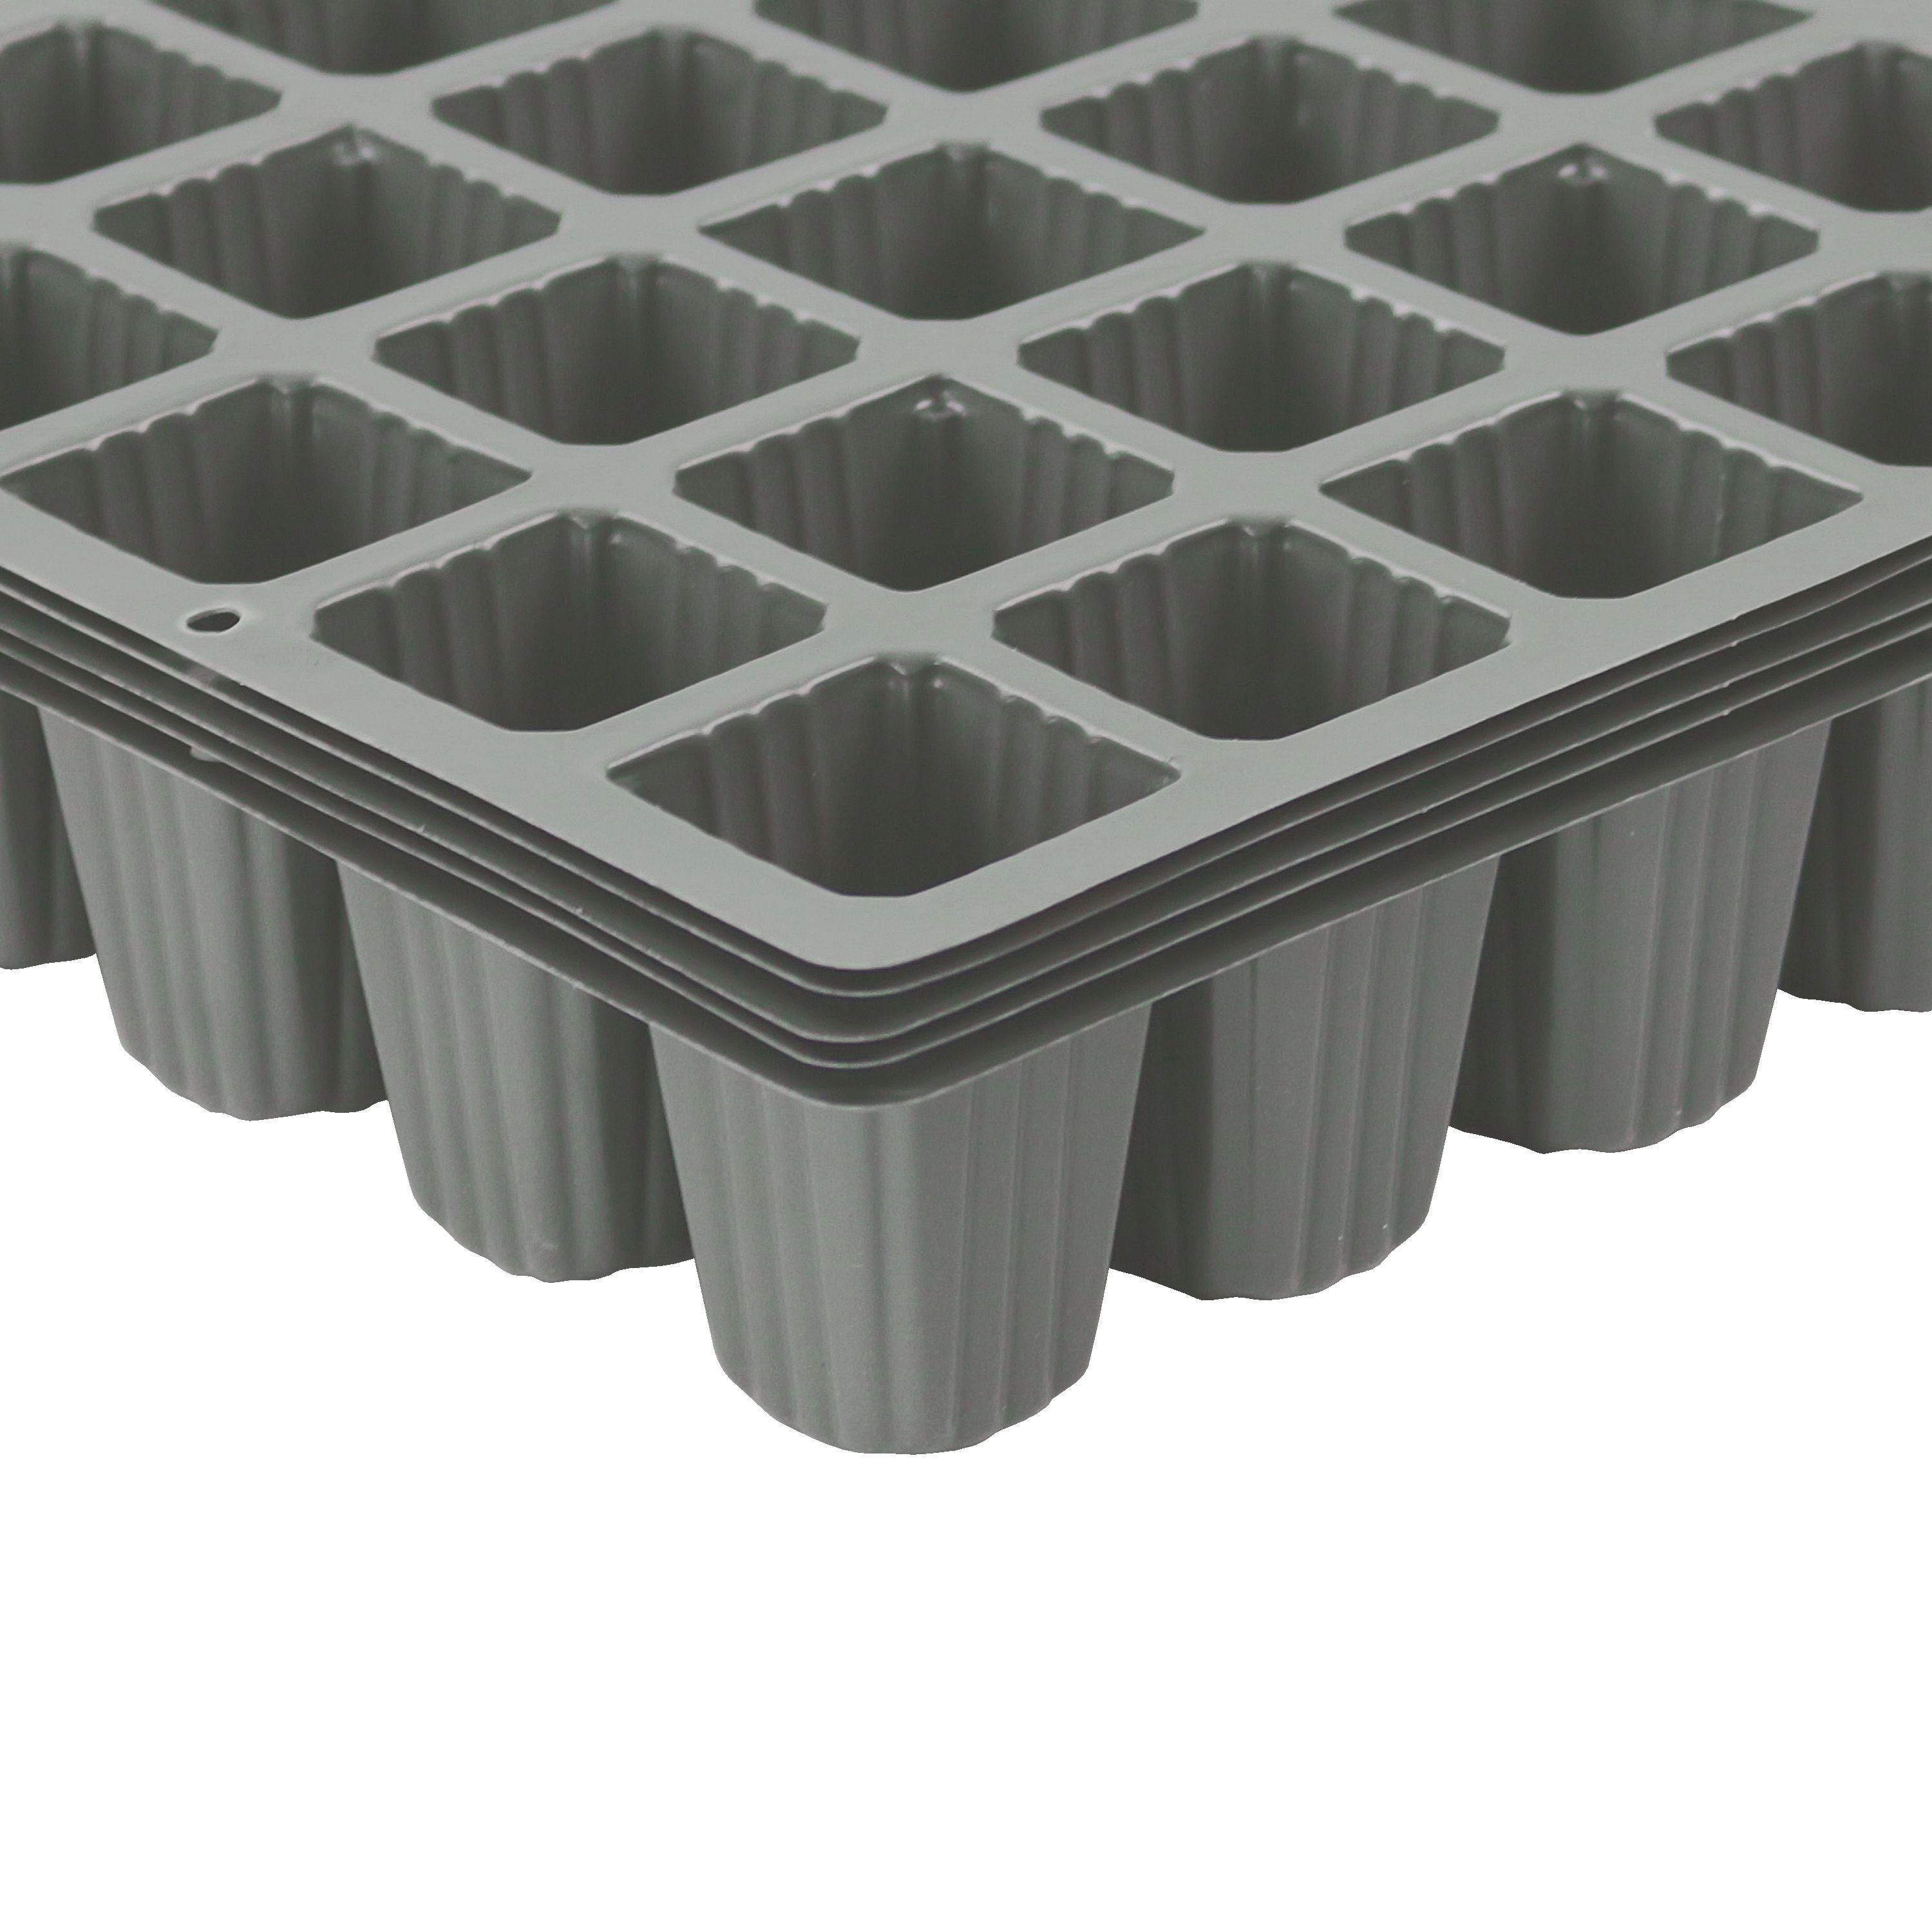 Verve 40 cell Grey Tray (L)35cm, Pack of 5